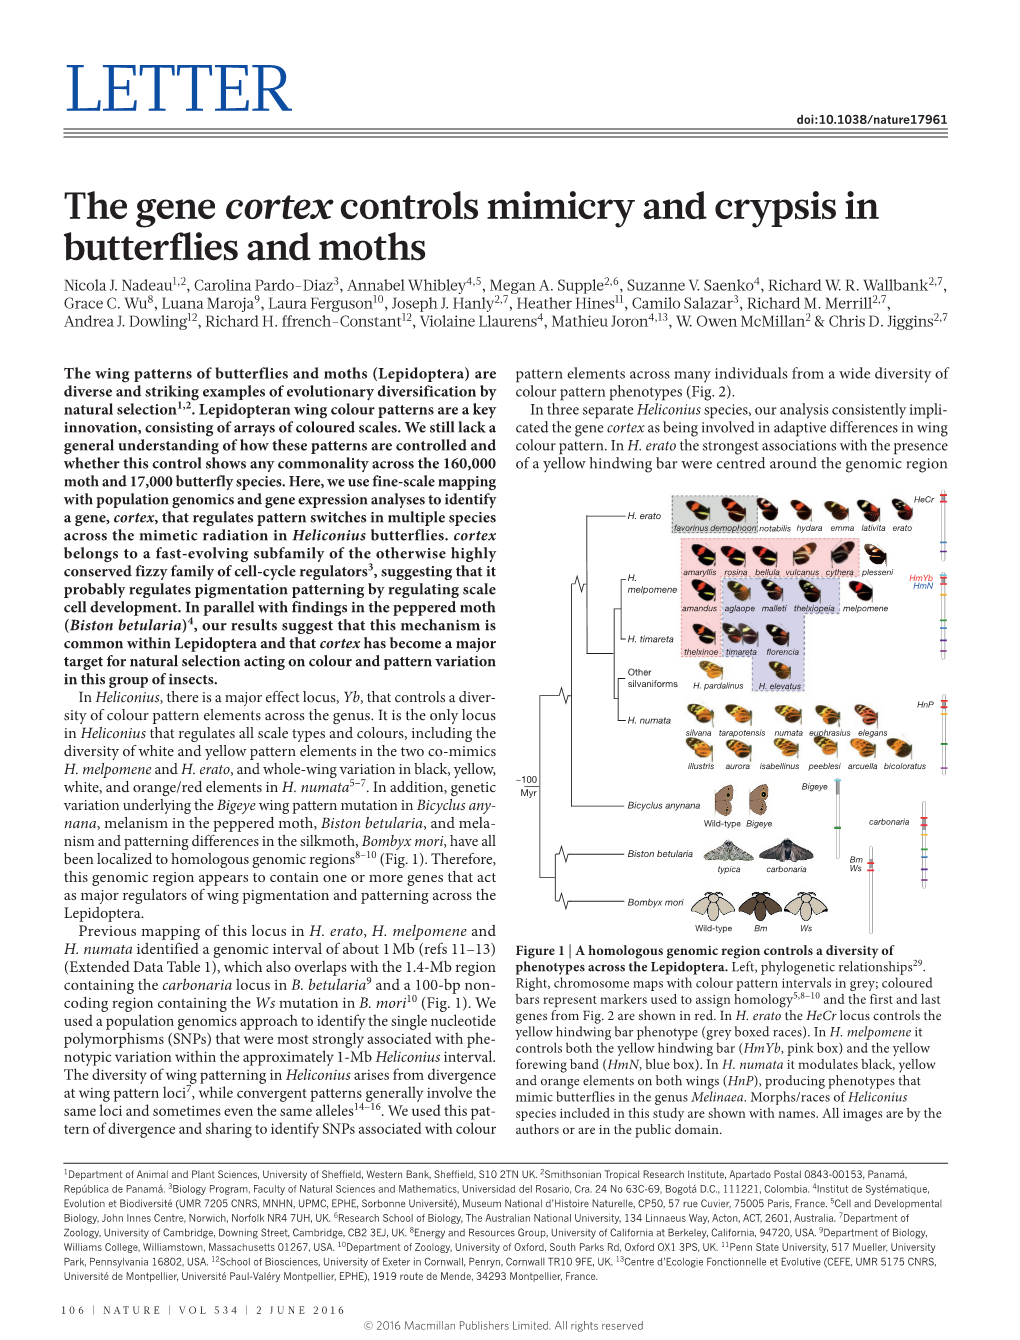 The Gene Cortex Controls Mimicry and Crypsis in Butterflies and Moths Nicola J